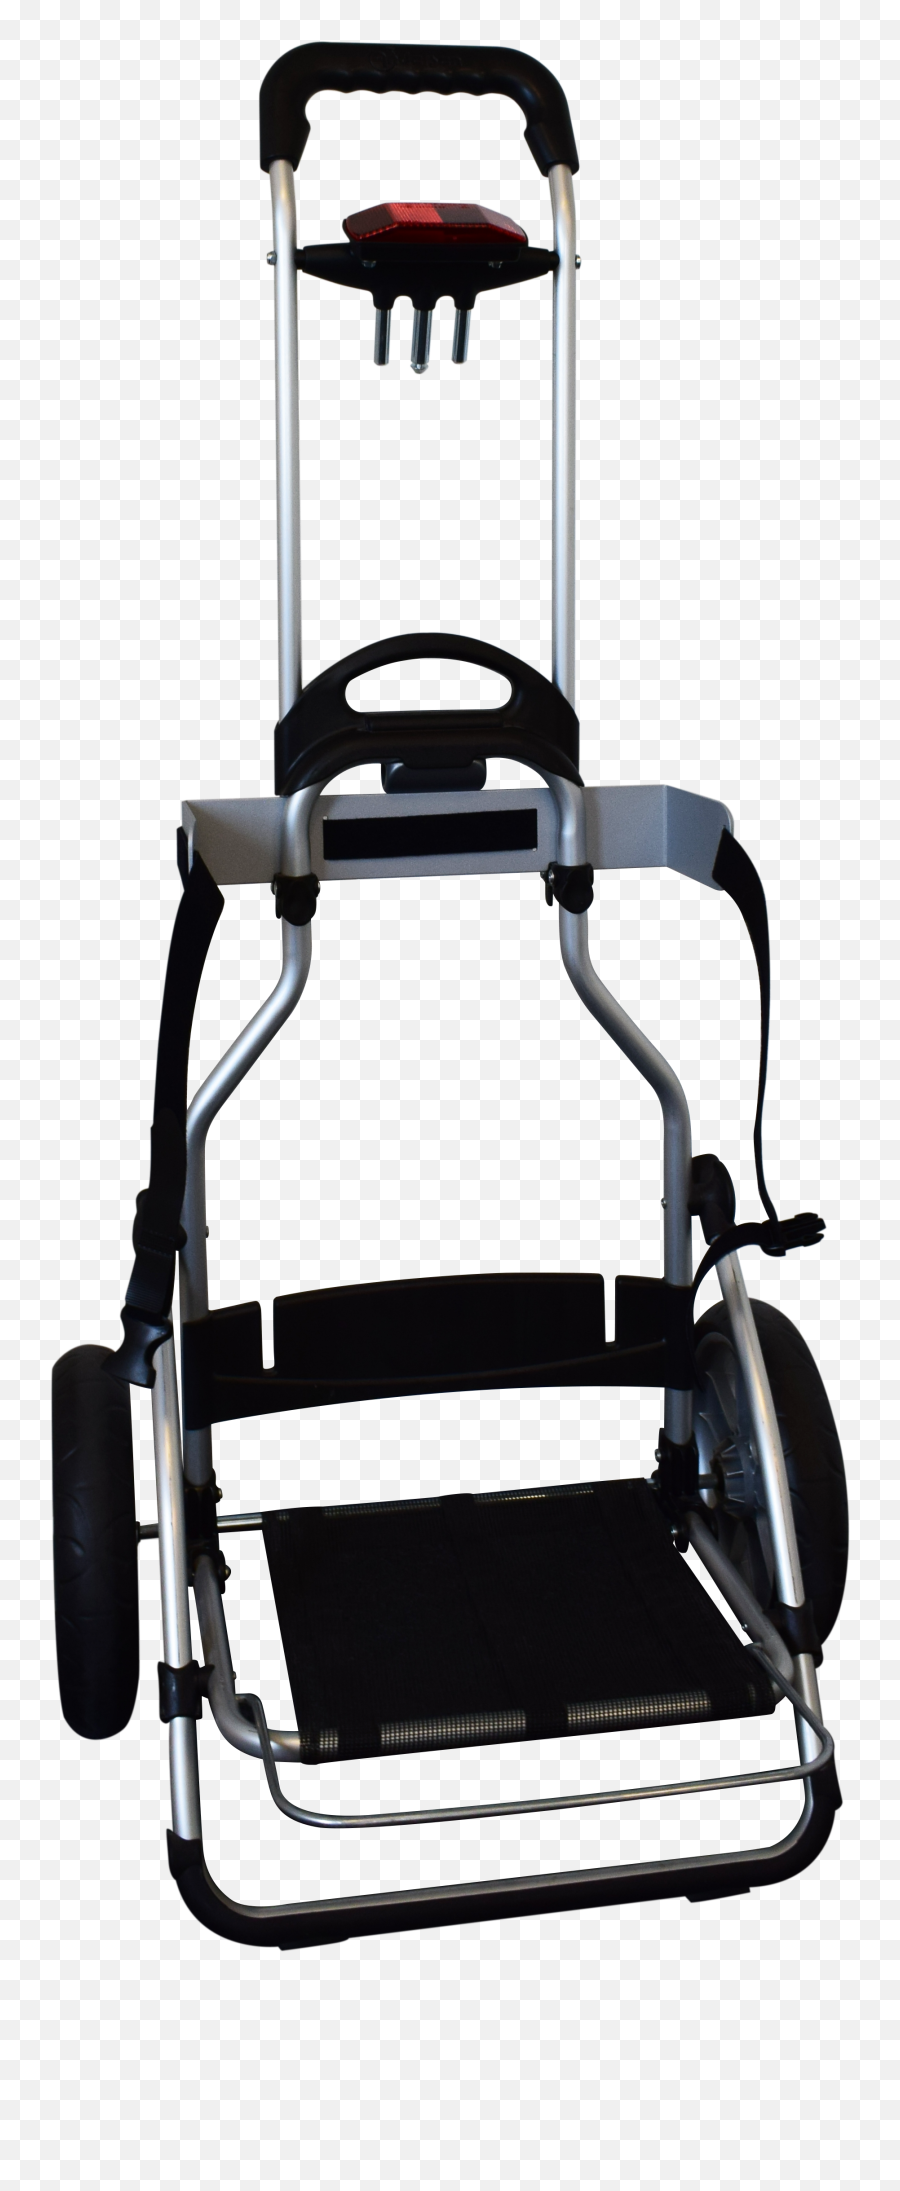 Raizer Ii - Raizer Lifting Chair Find Details Here Liftup Chair Png,Person Sitting In Chair Back View Png